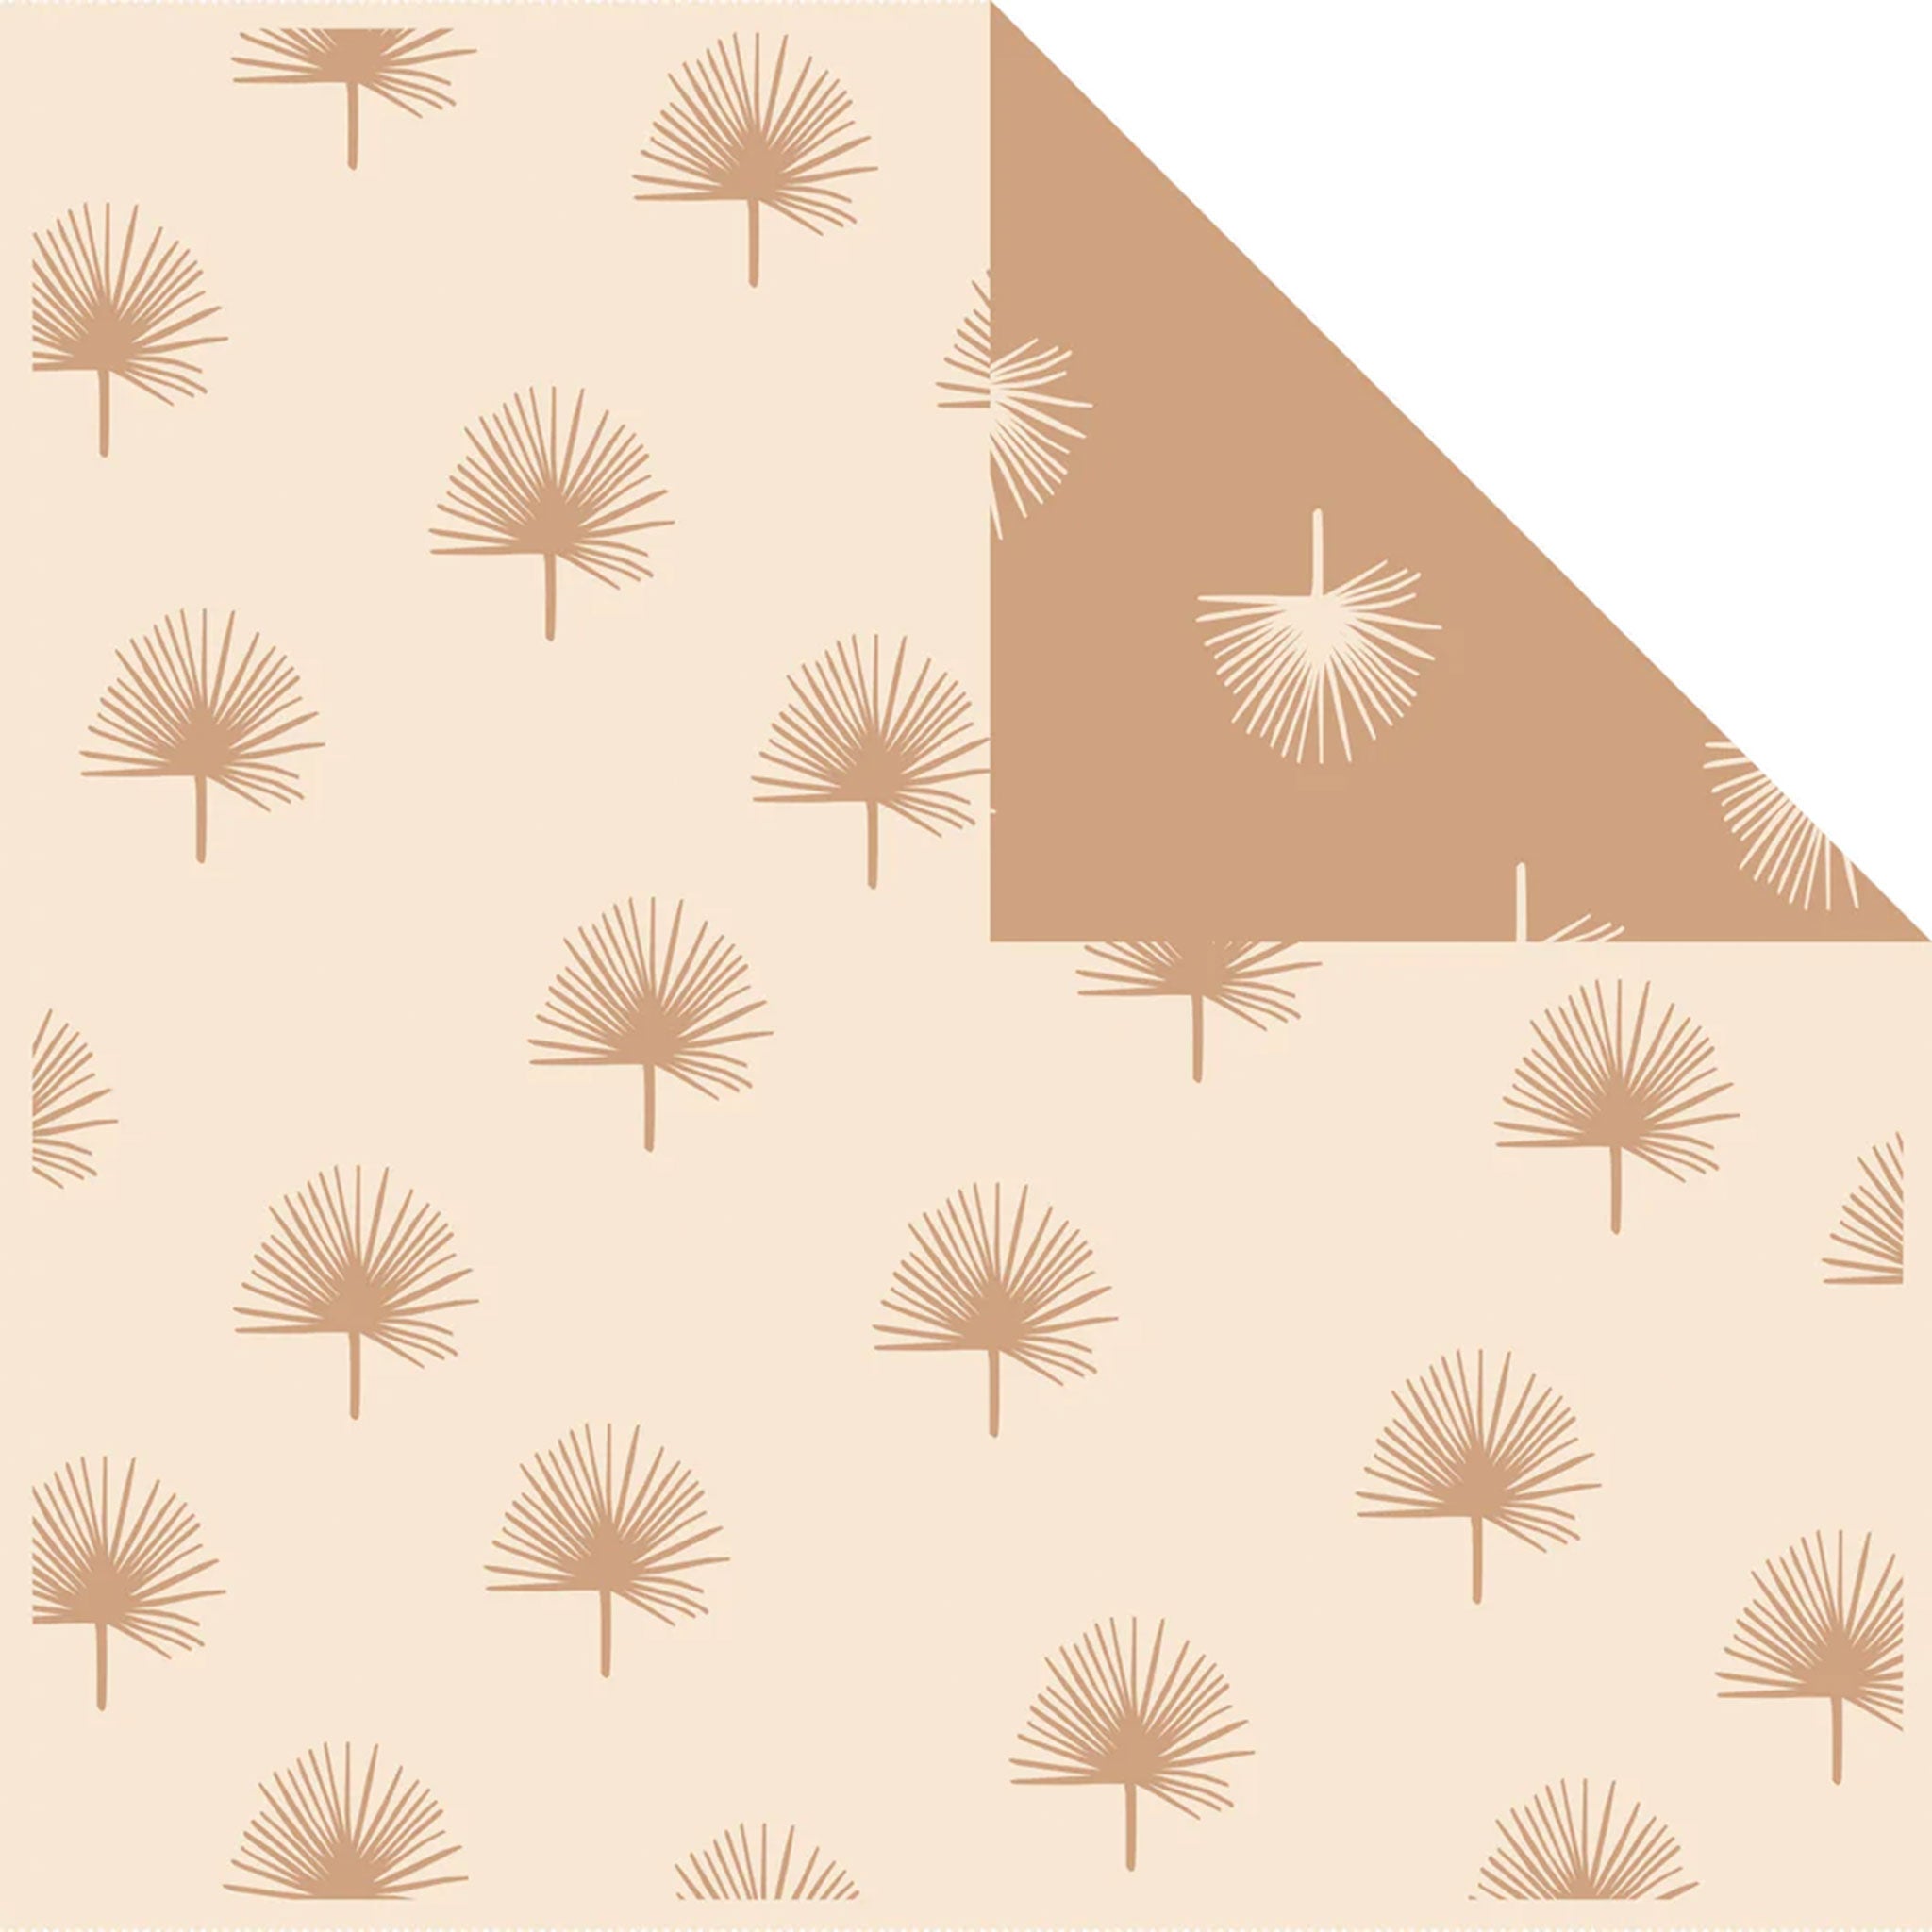 A neutral reversible cotton blanket with a beige side and a darker biscuit shade on the other. There is a repeating fan palm design.